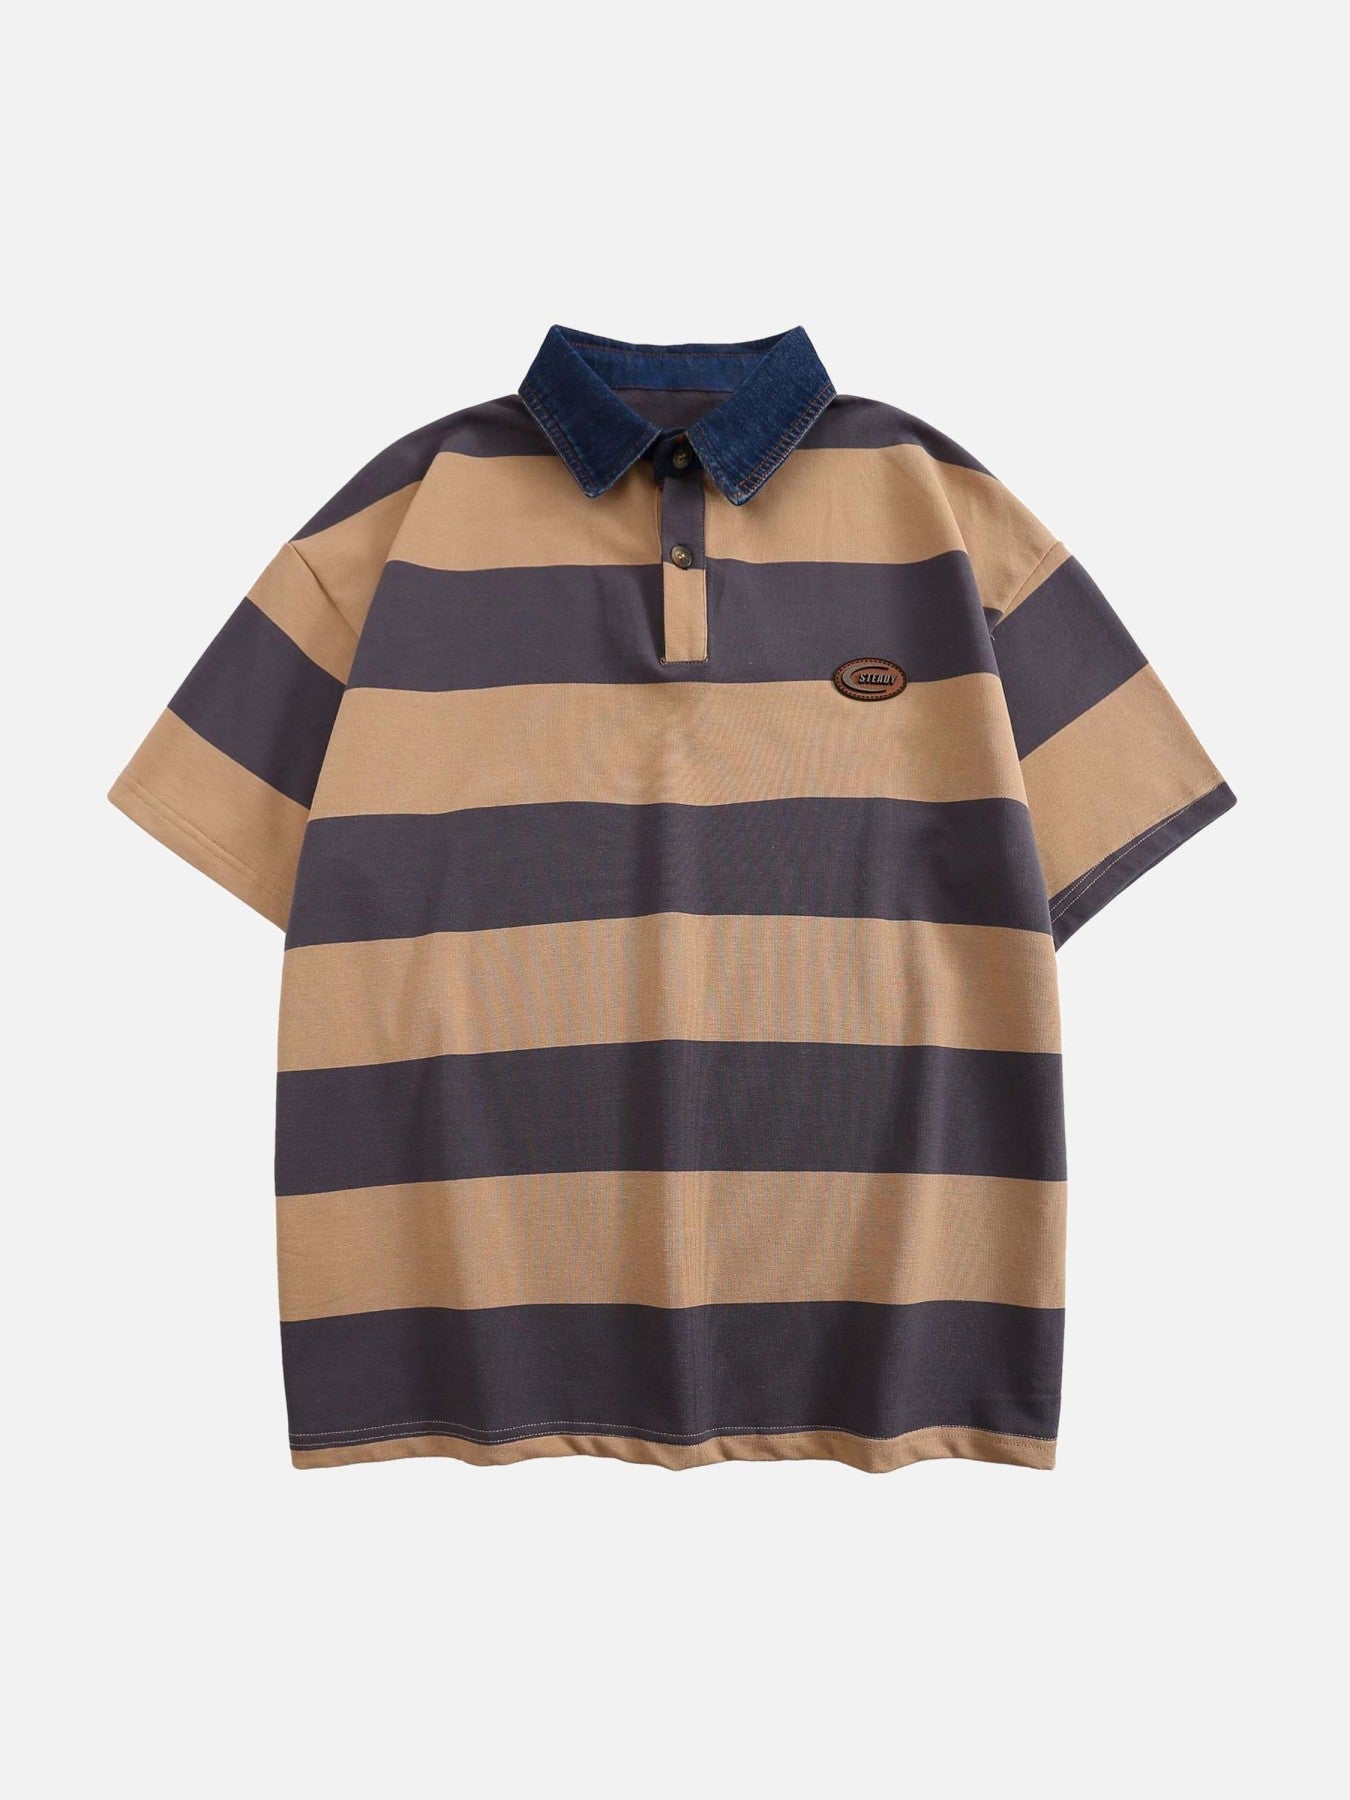 Thesupermade Vintage Color Striped Polo Shirt